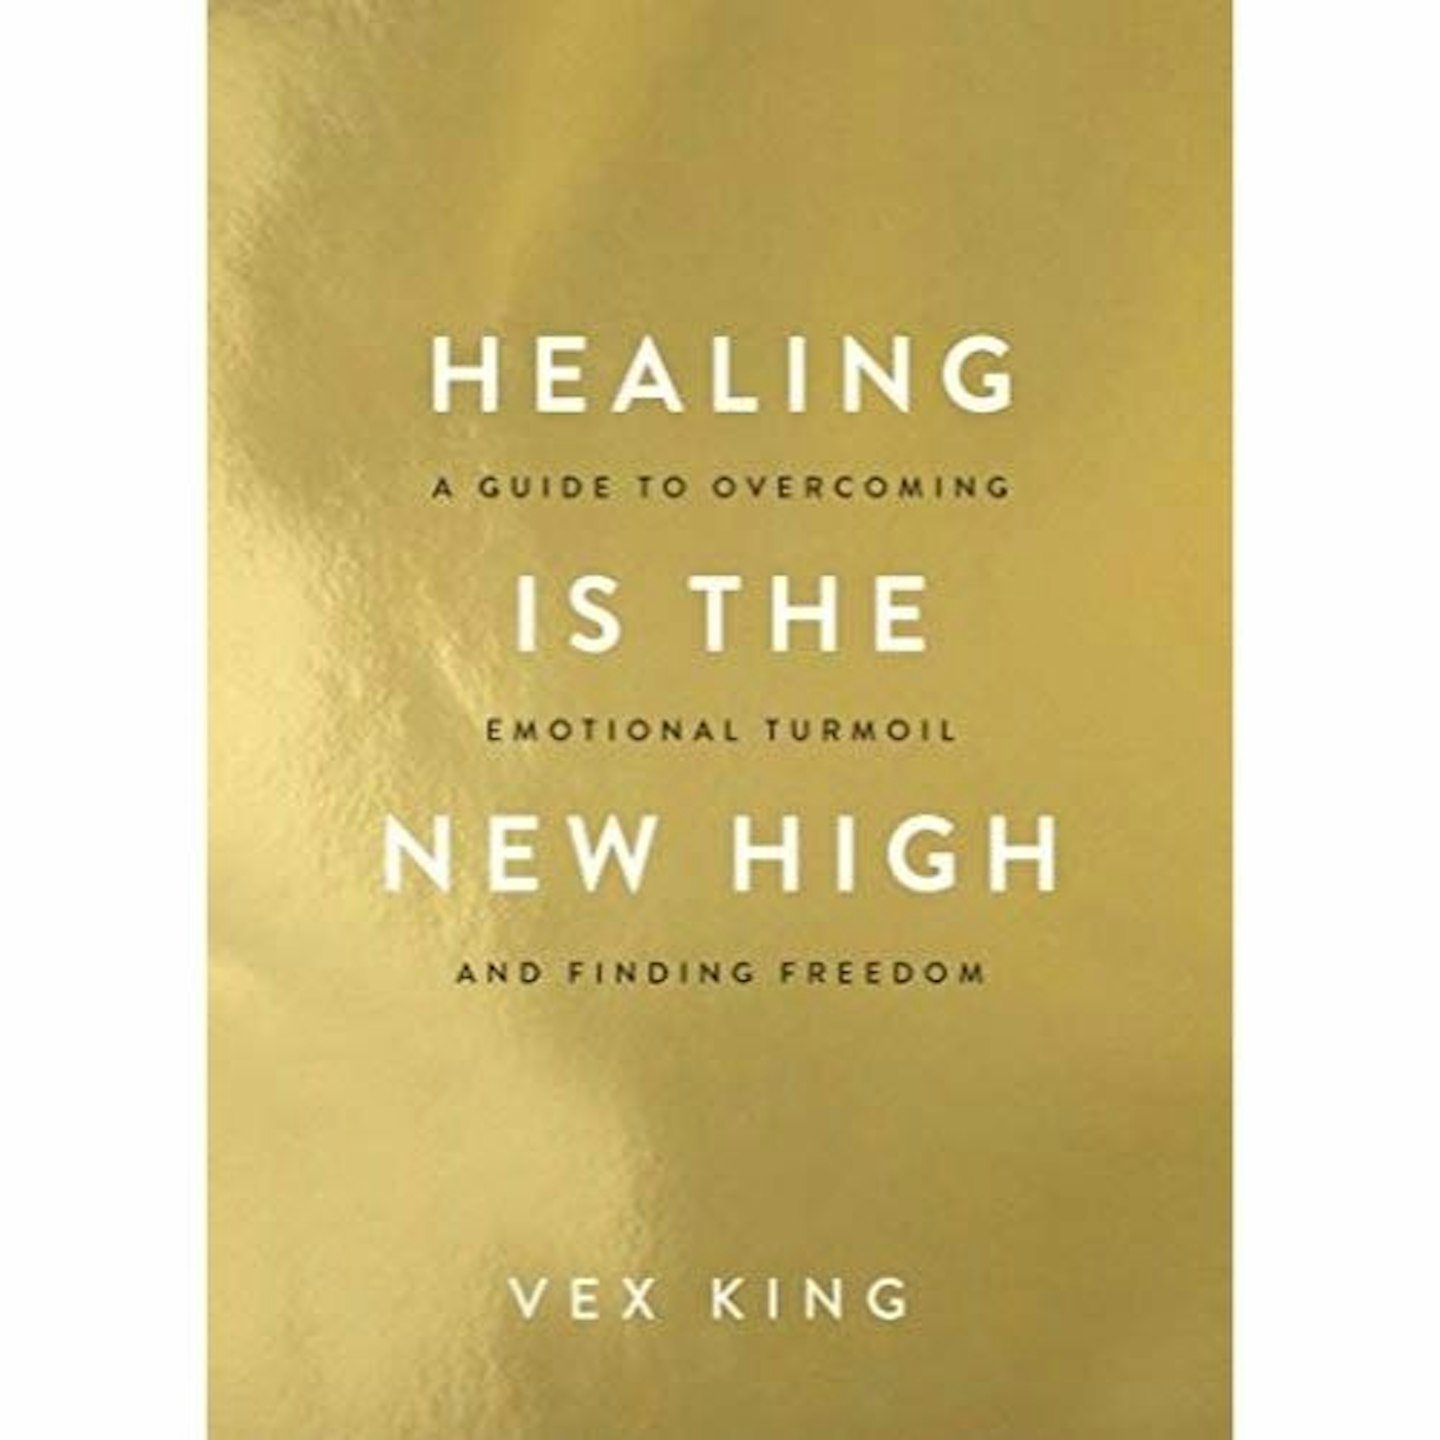 best wellbeing books - Healing Is the New High: A Guide to Overcoming Emotional Turmoil and Finding Freedom